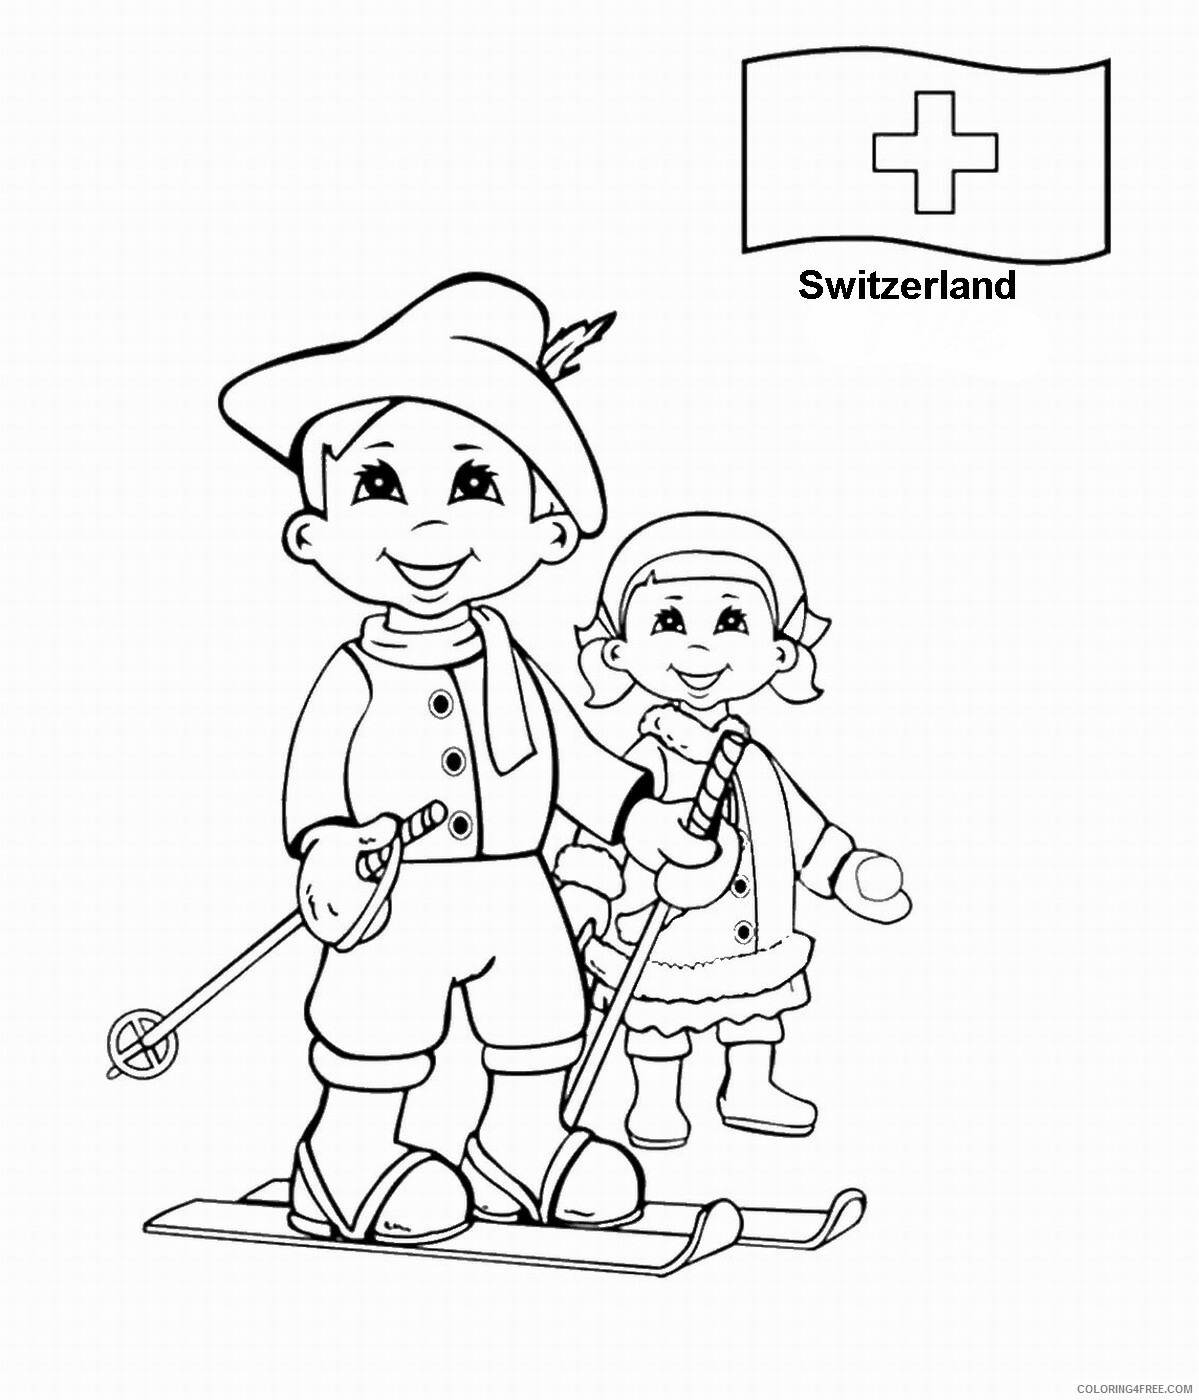 Around the World Coloring Pages switzerland Printable 2021 0338 Coloring4free